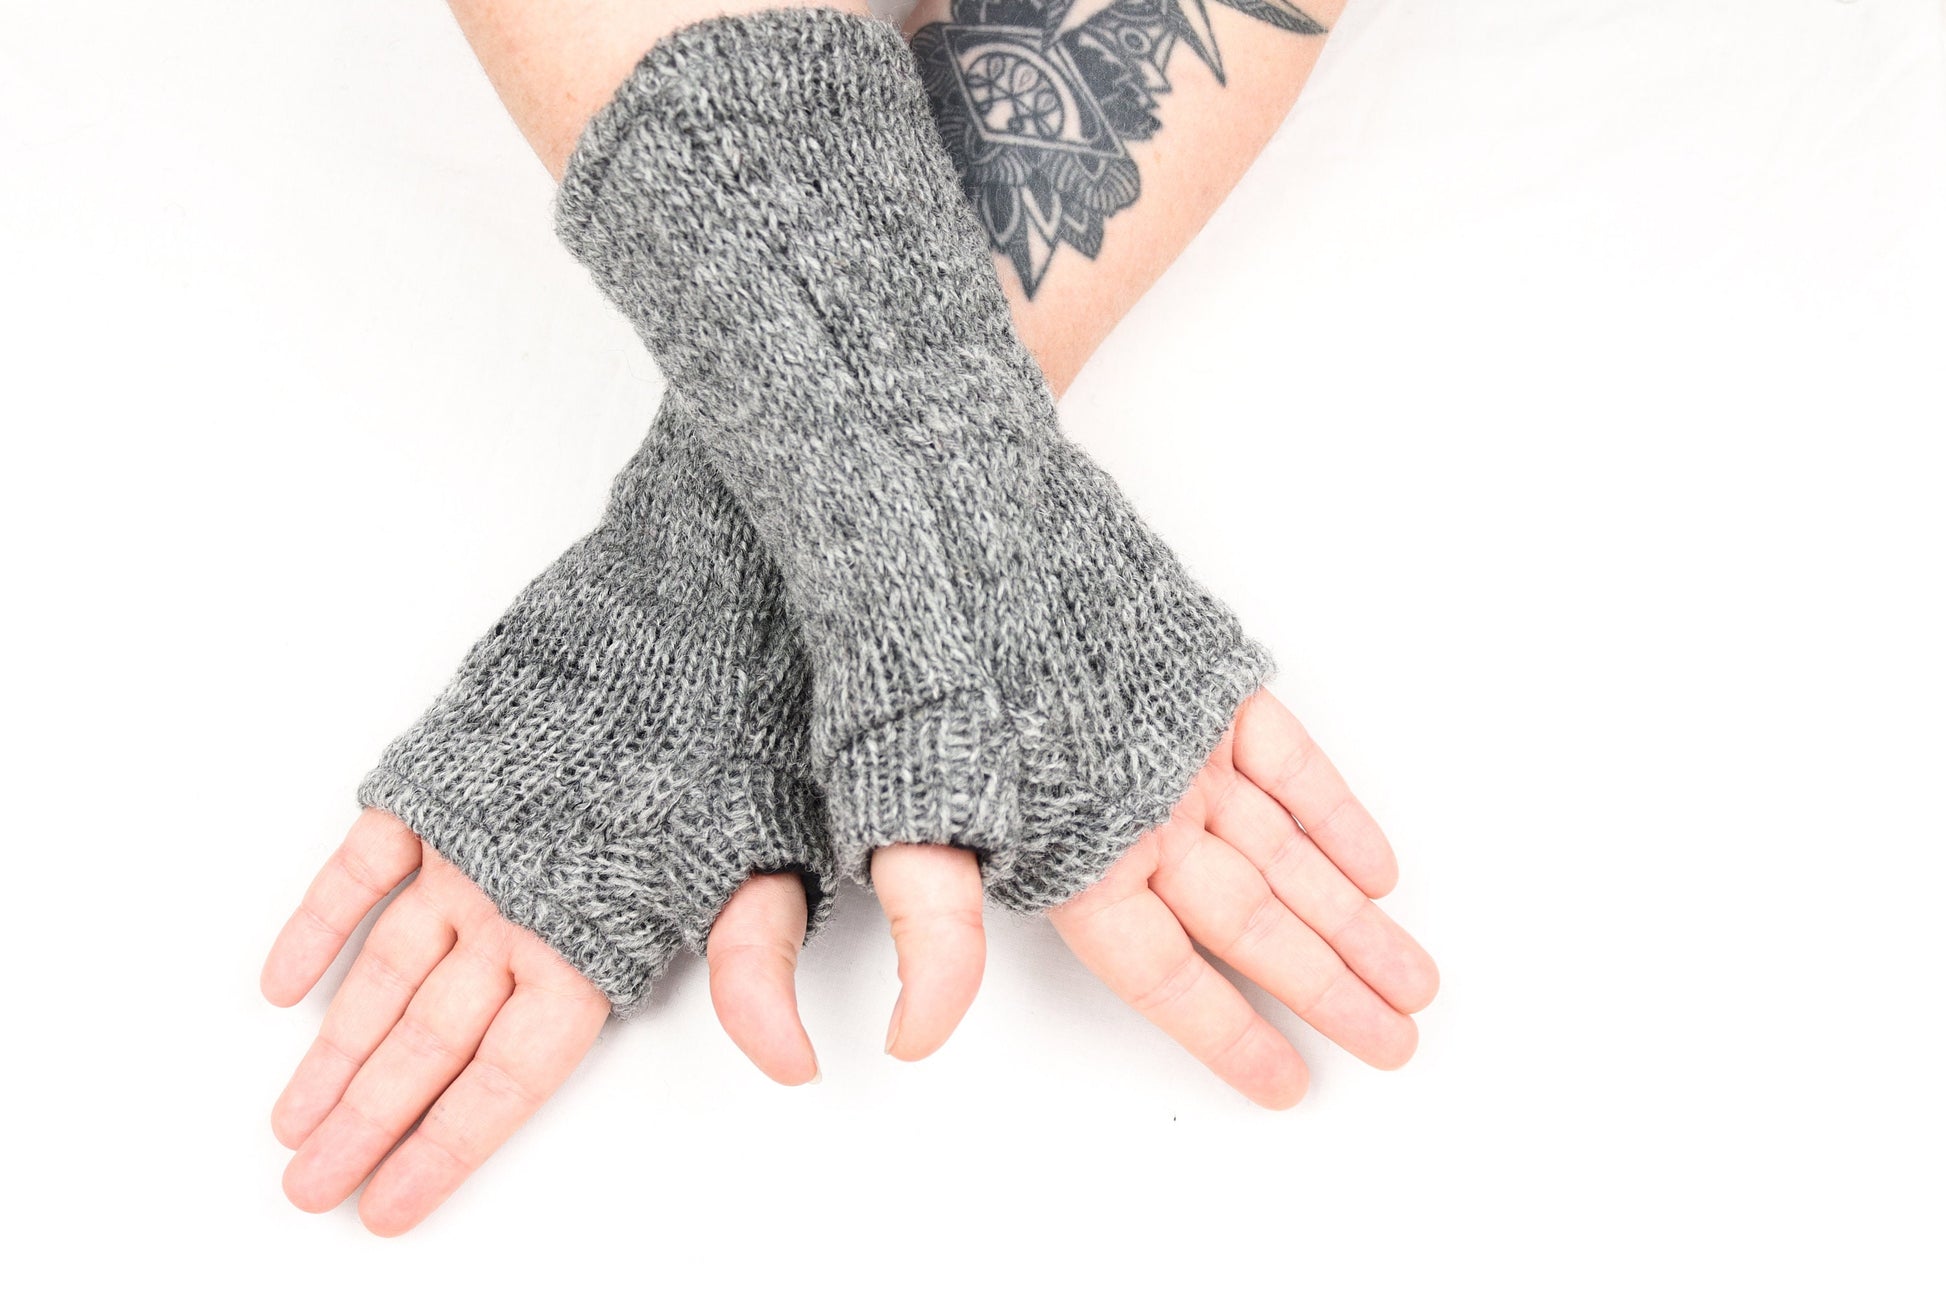 Fleece Lined Knitted Wrist Warmers - Grey - Bare Canvas